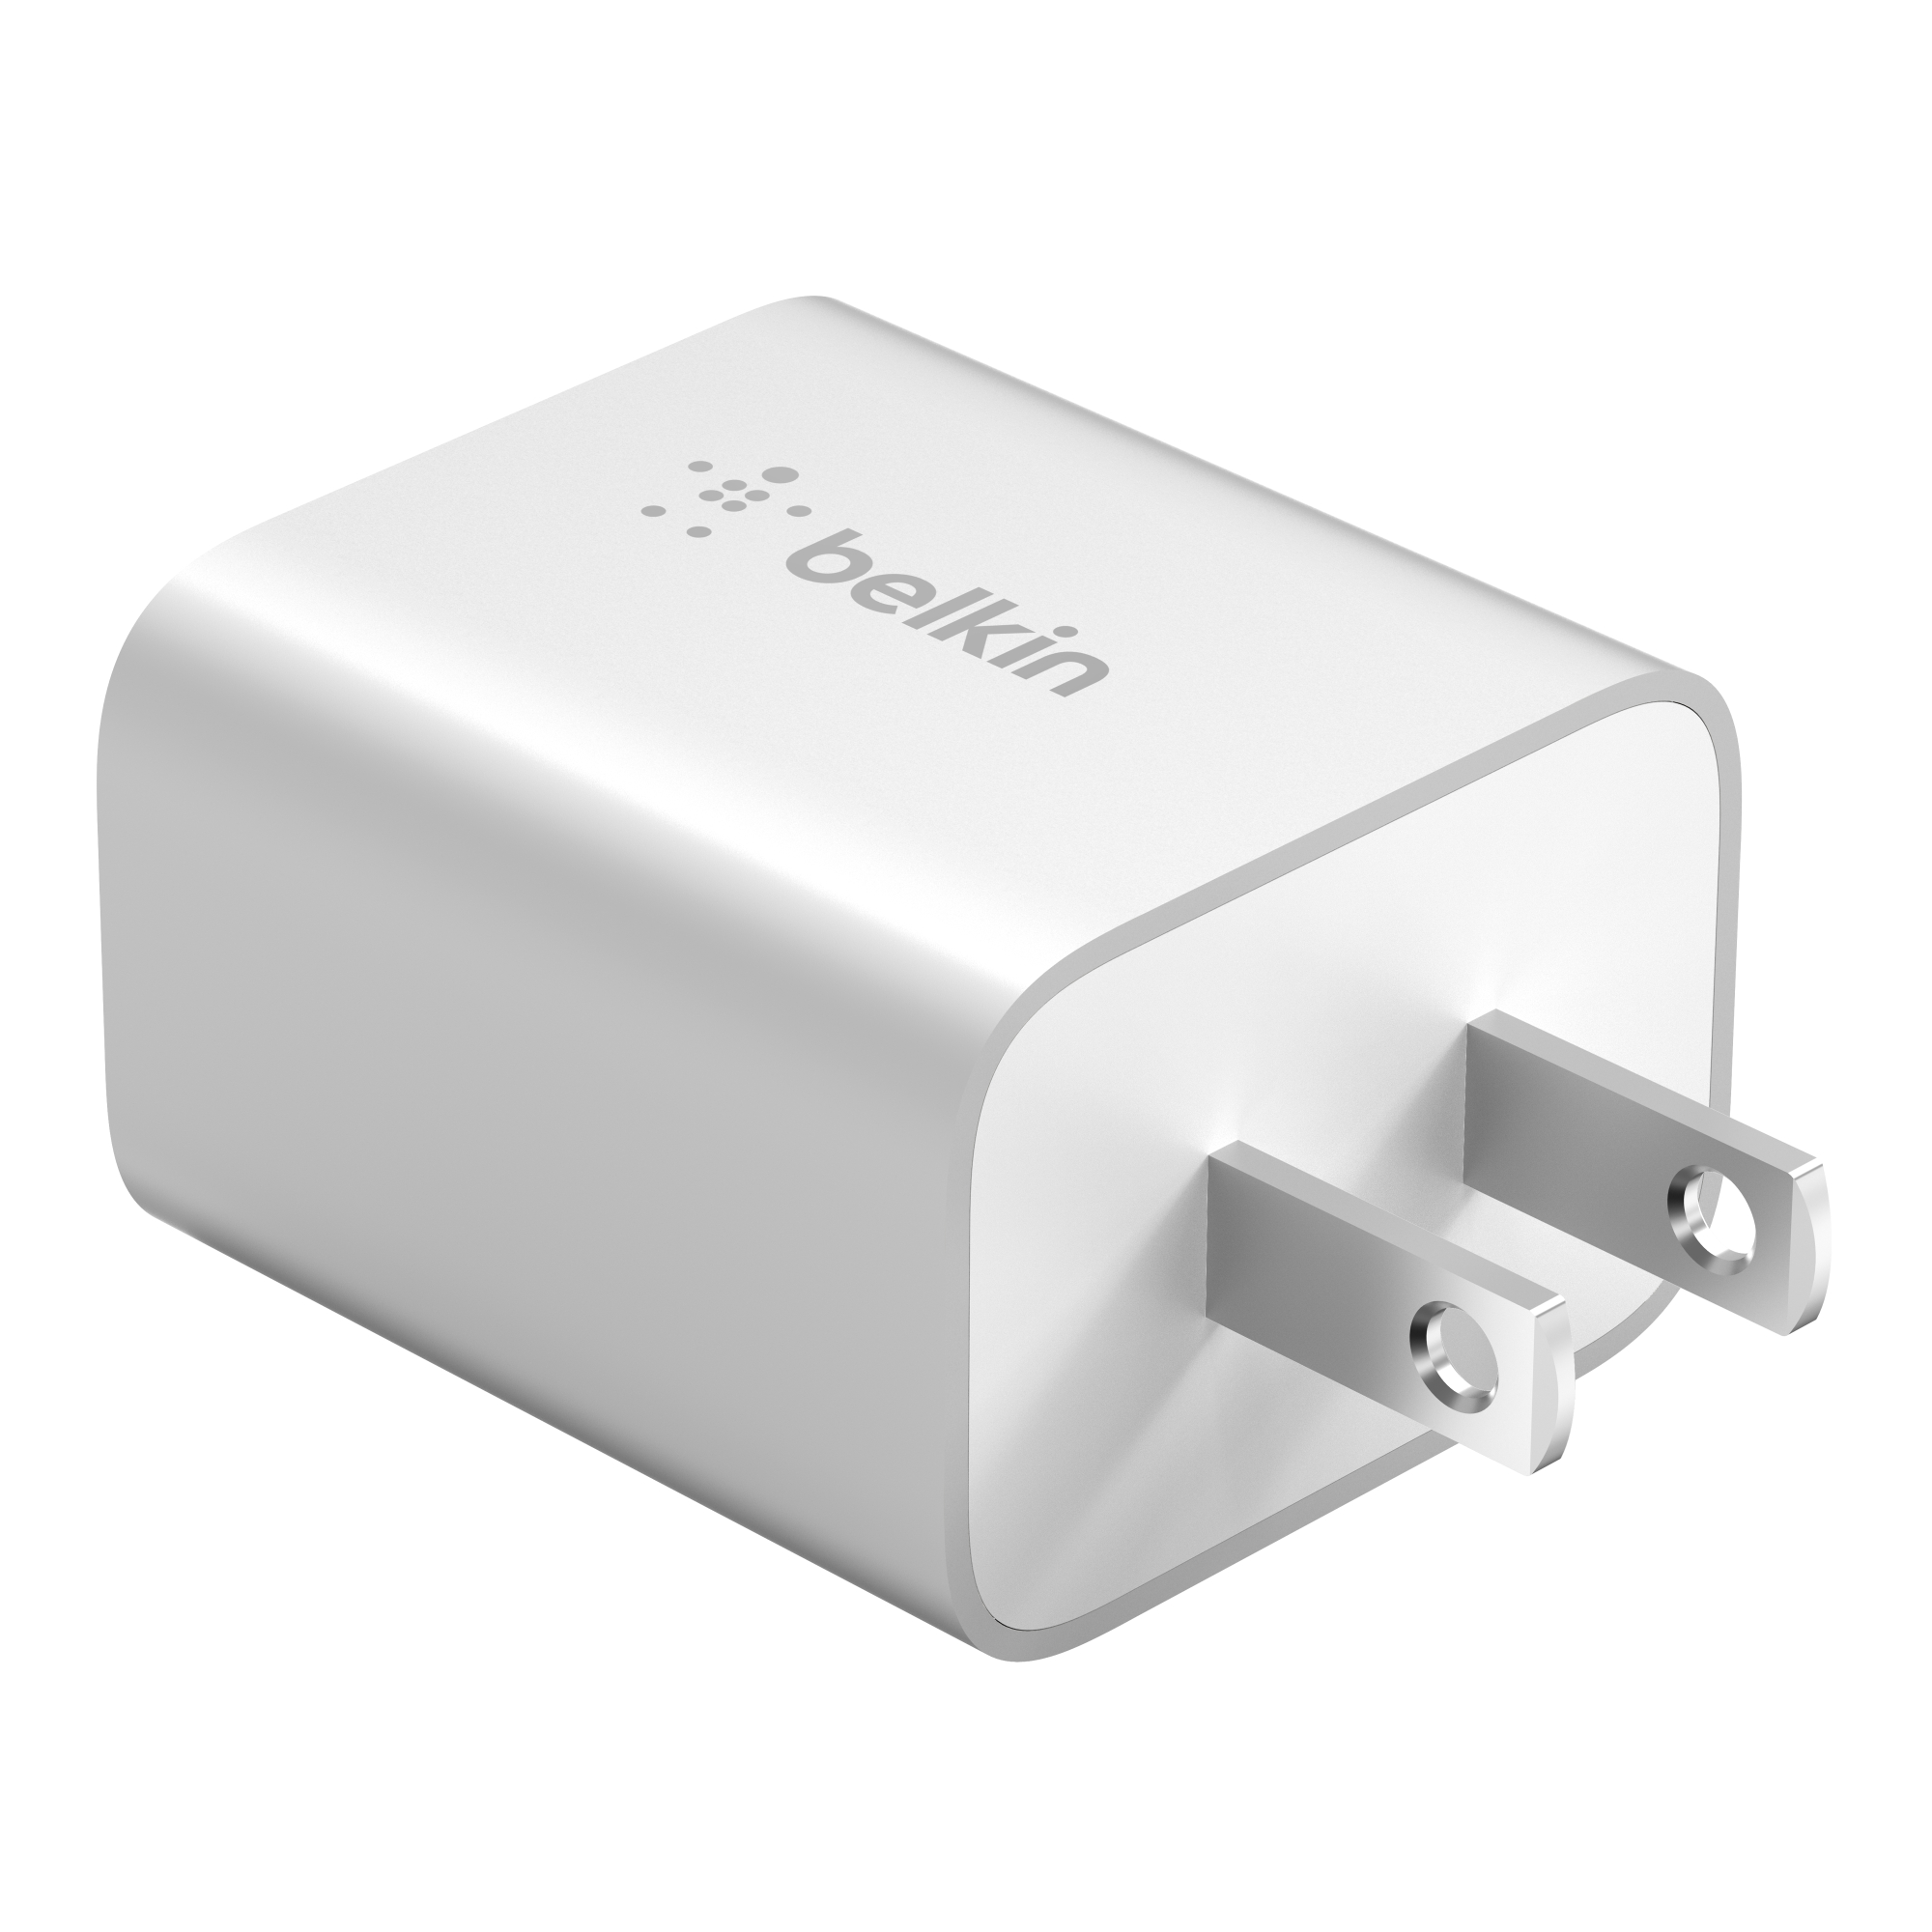 Belkin 20W USB C Wall Fast Charger - for iPhone , Samsung Galaxy, iPad, AirPods & More - Silver - image 1 of 9